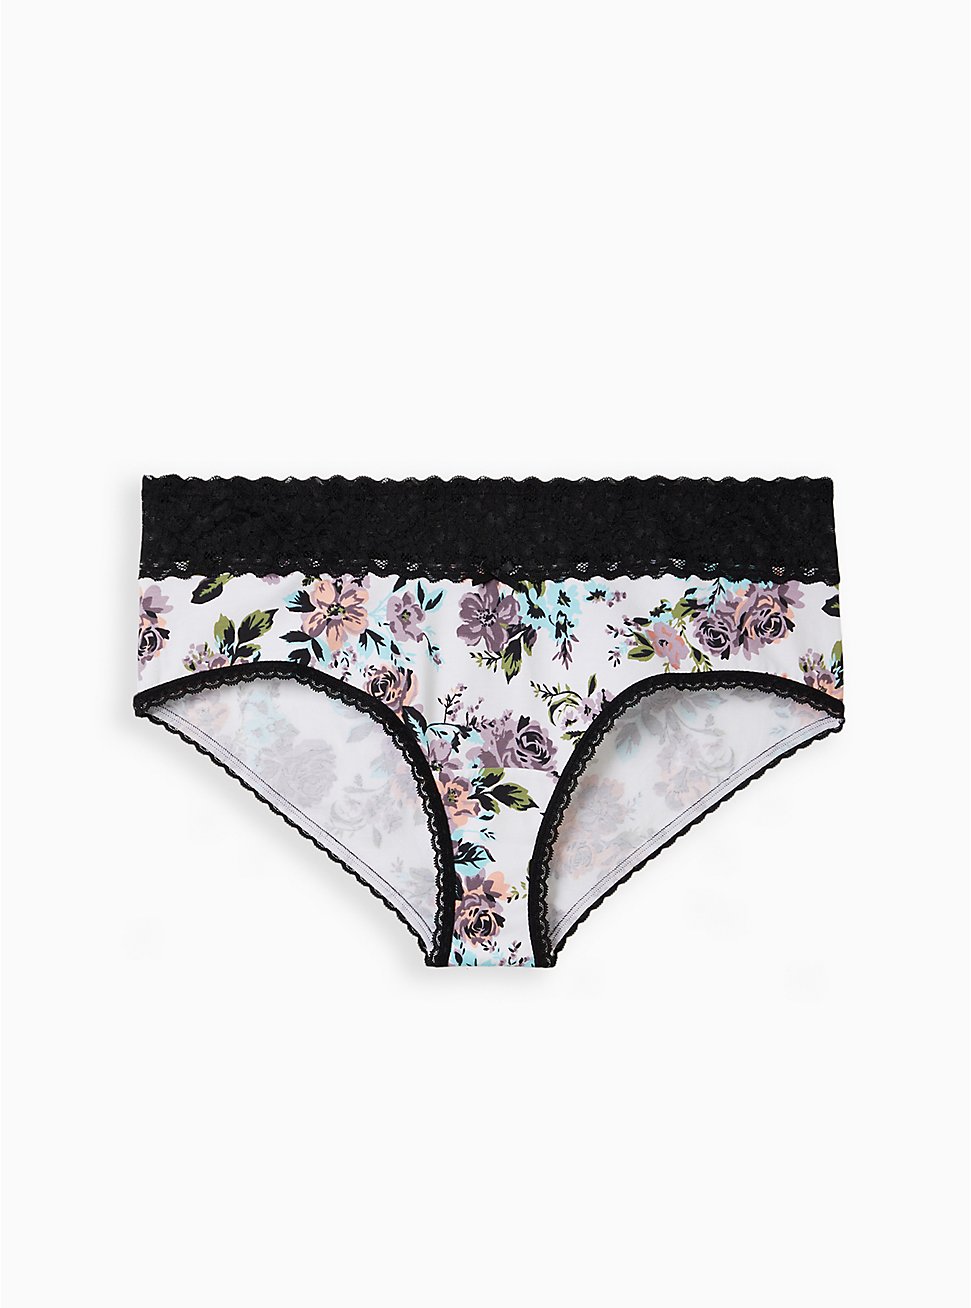 Wide Lace Trim Cheeky Panty - Cotton Floral White, PINKY SWEAR FLORAL: WHITE, hi-res